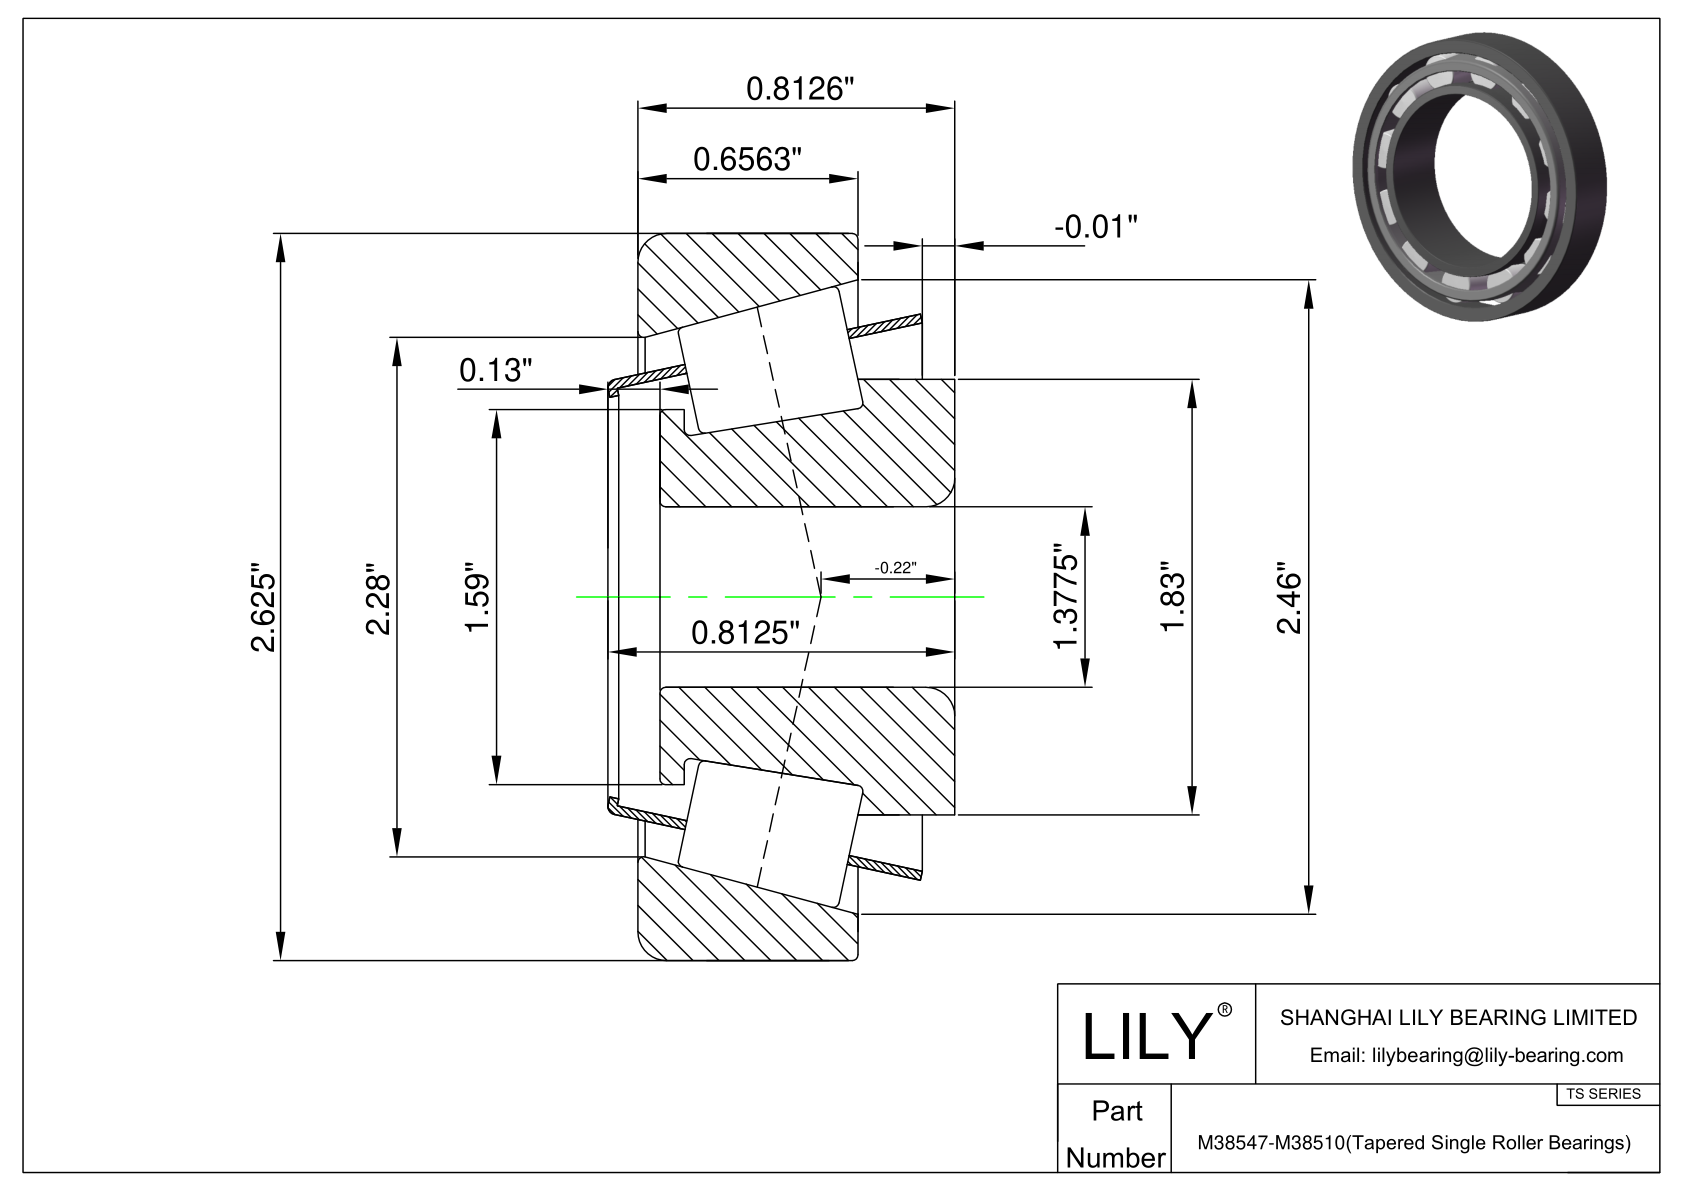 M38547-M38510 TS (Tapered Single Roller Bearings) (Imperial) cad drawing